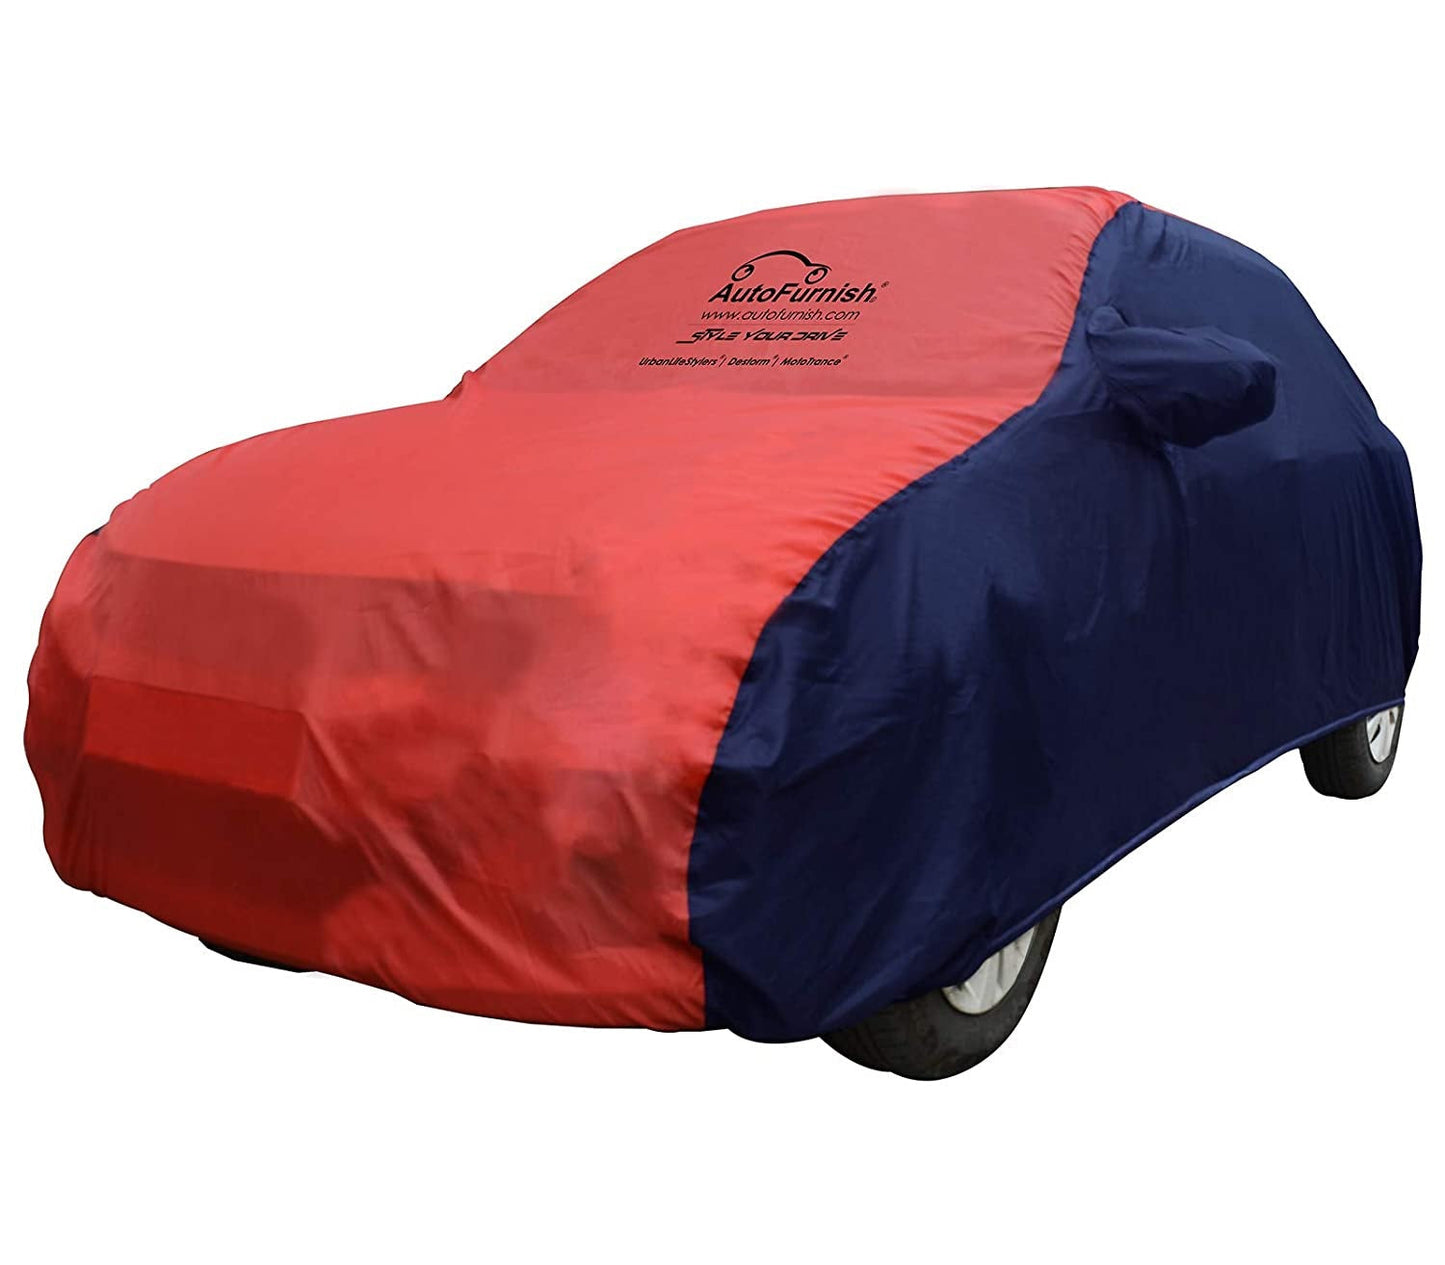 Mercedes C300 (2019) Car Body Cover, Triple Stitched, Heat & Water Resistant with Side Mirror Pockets (SPORTY Series)